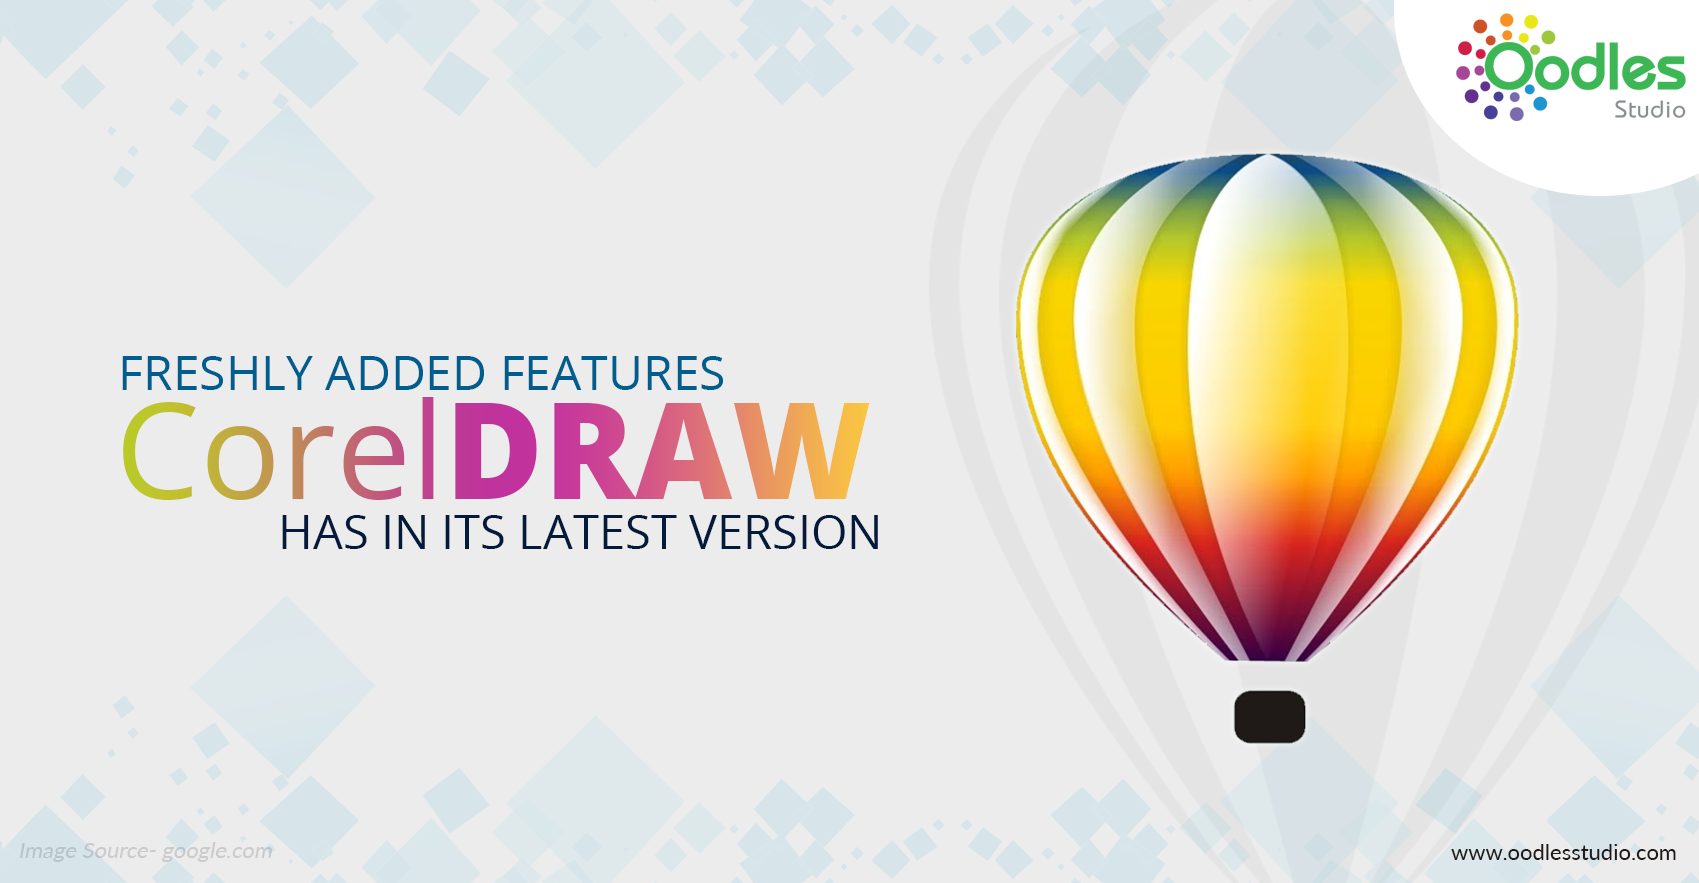 What is CorelDraw and what are the uses of CorelDraw